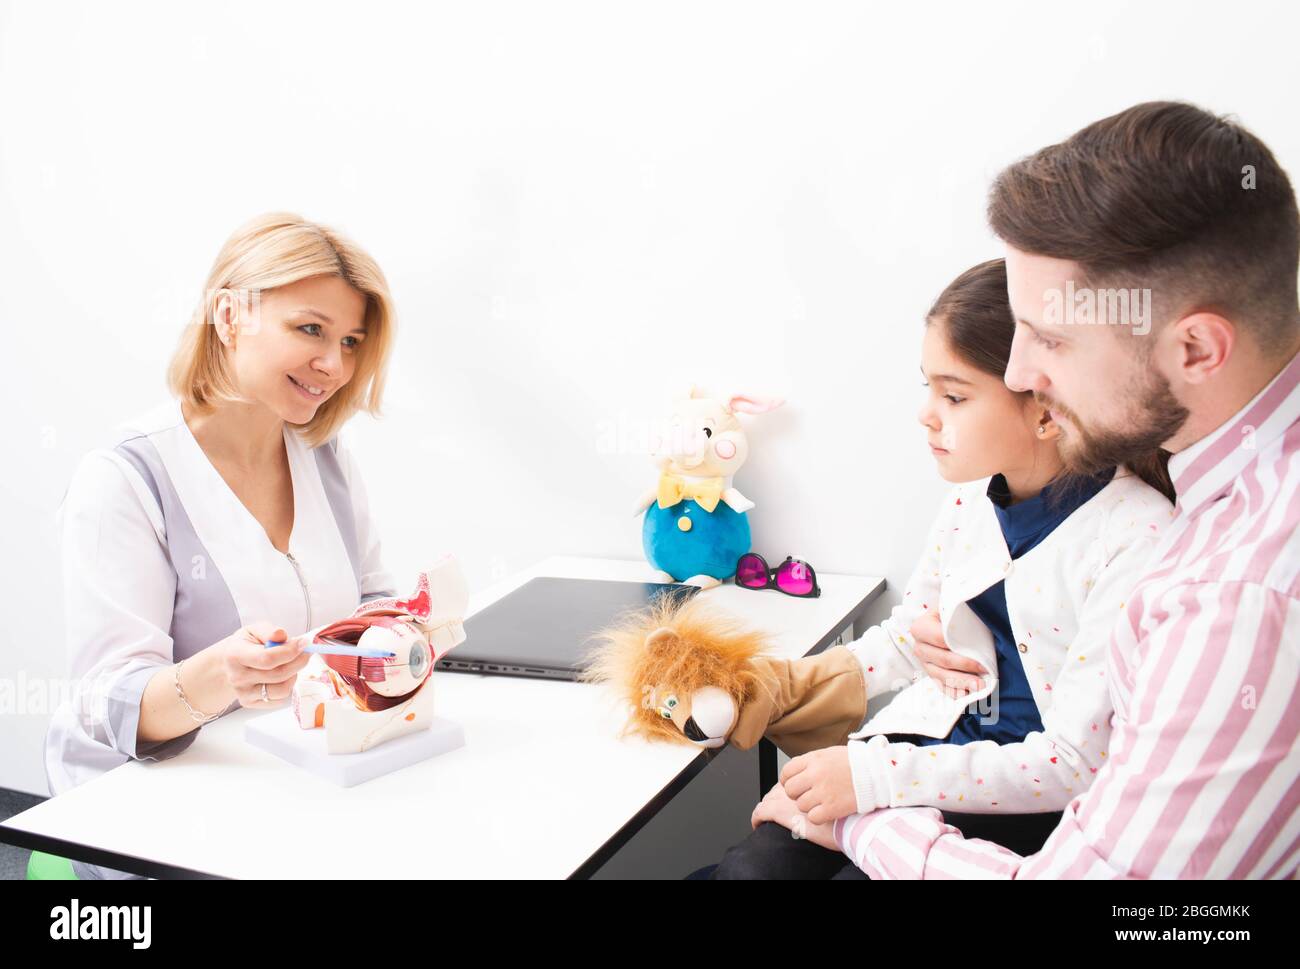 Woman optometrist shows a model of human eye to a little girl patient and her dad in ophthalmologic office. Correction of vision in children Stock Photo